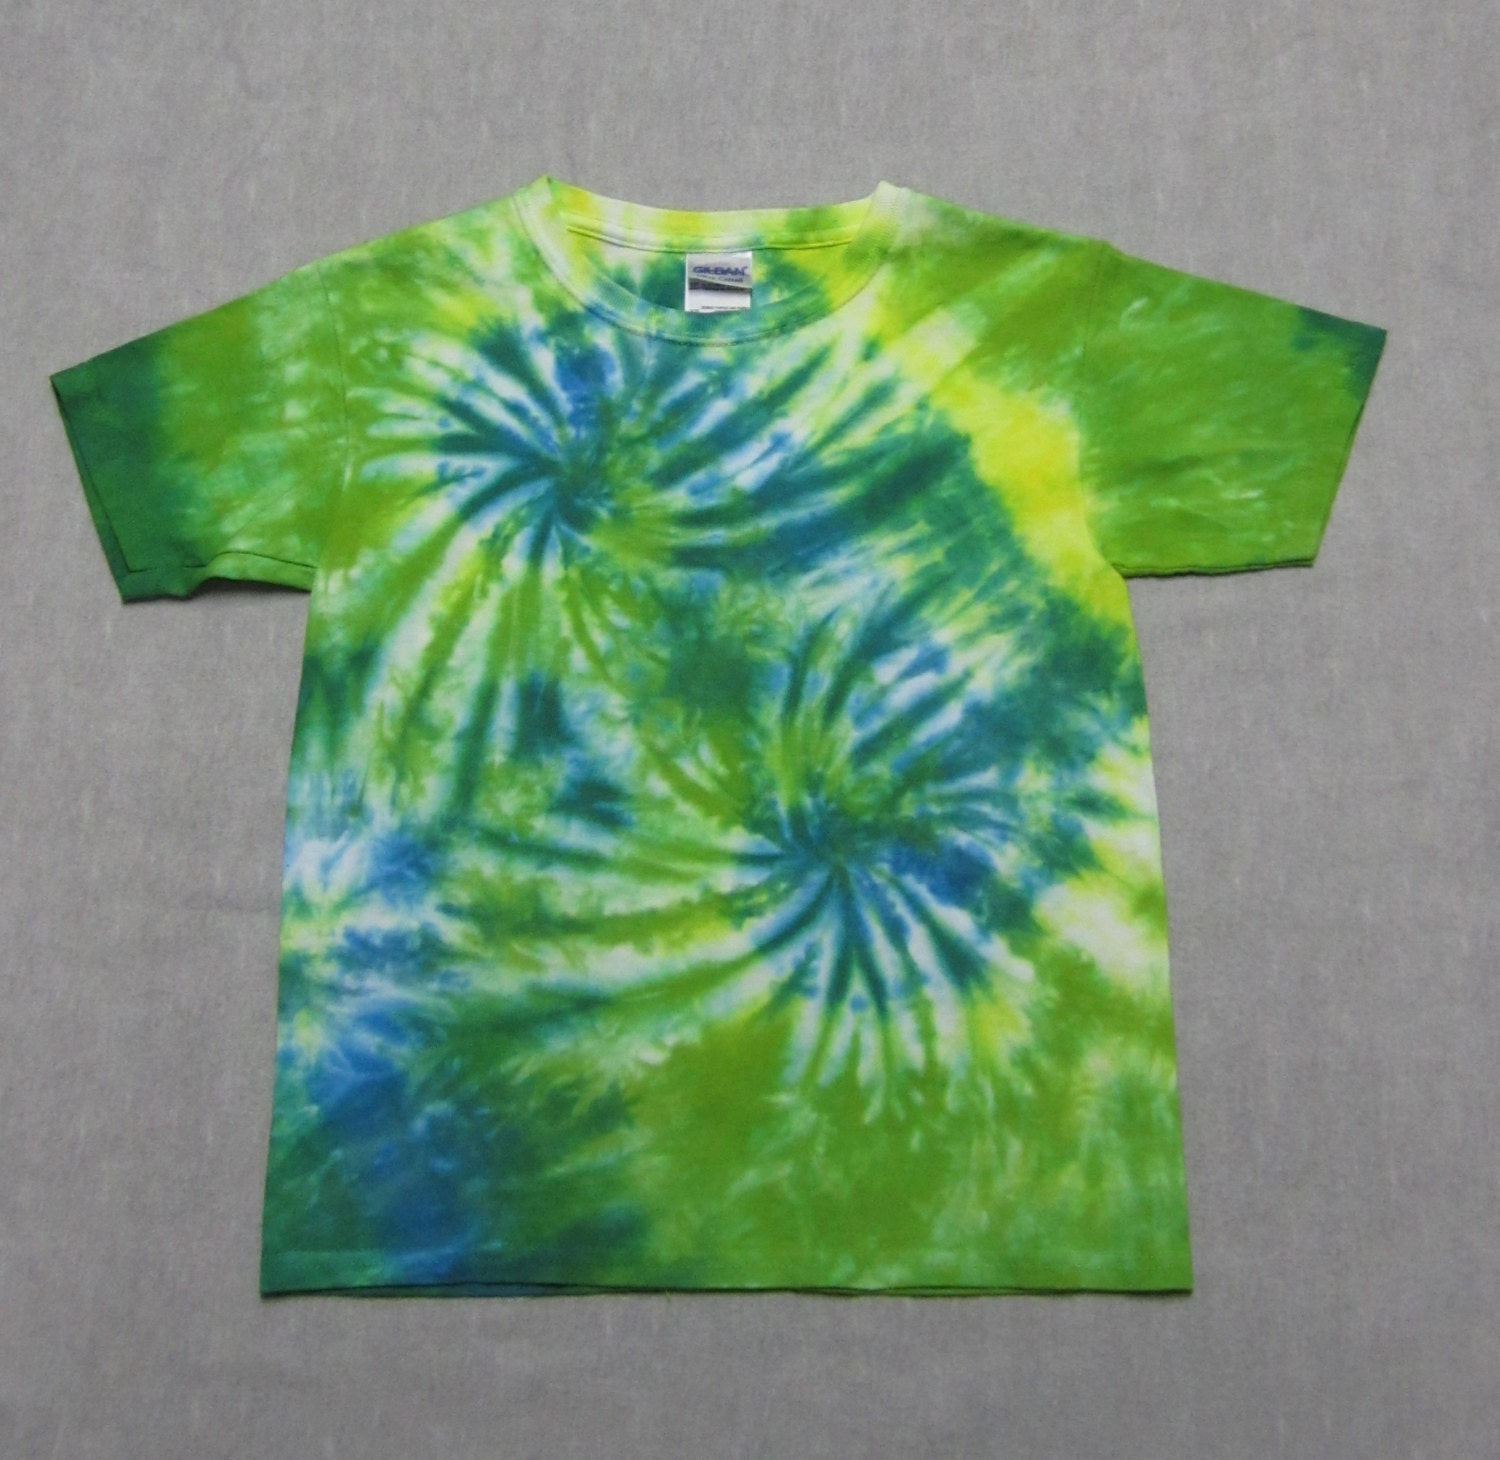 Tie dye youth size XS yellow green and blue spiral tee shirt.